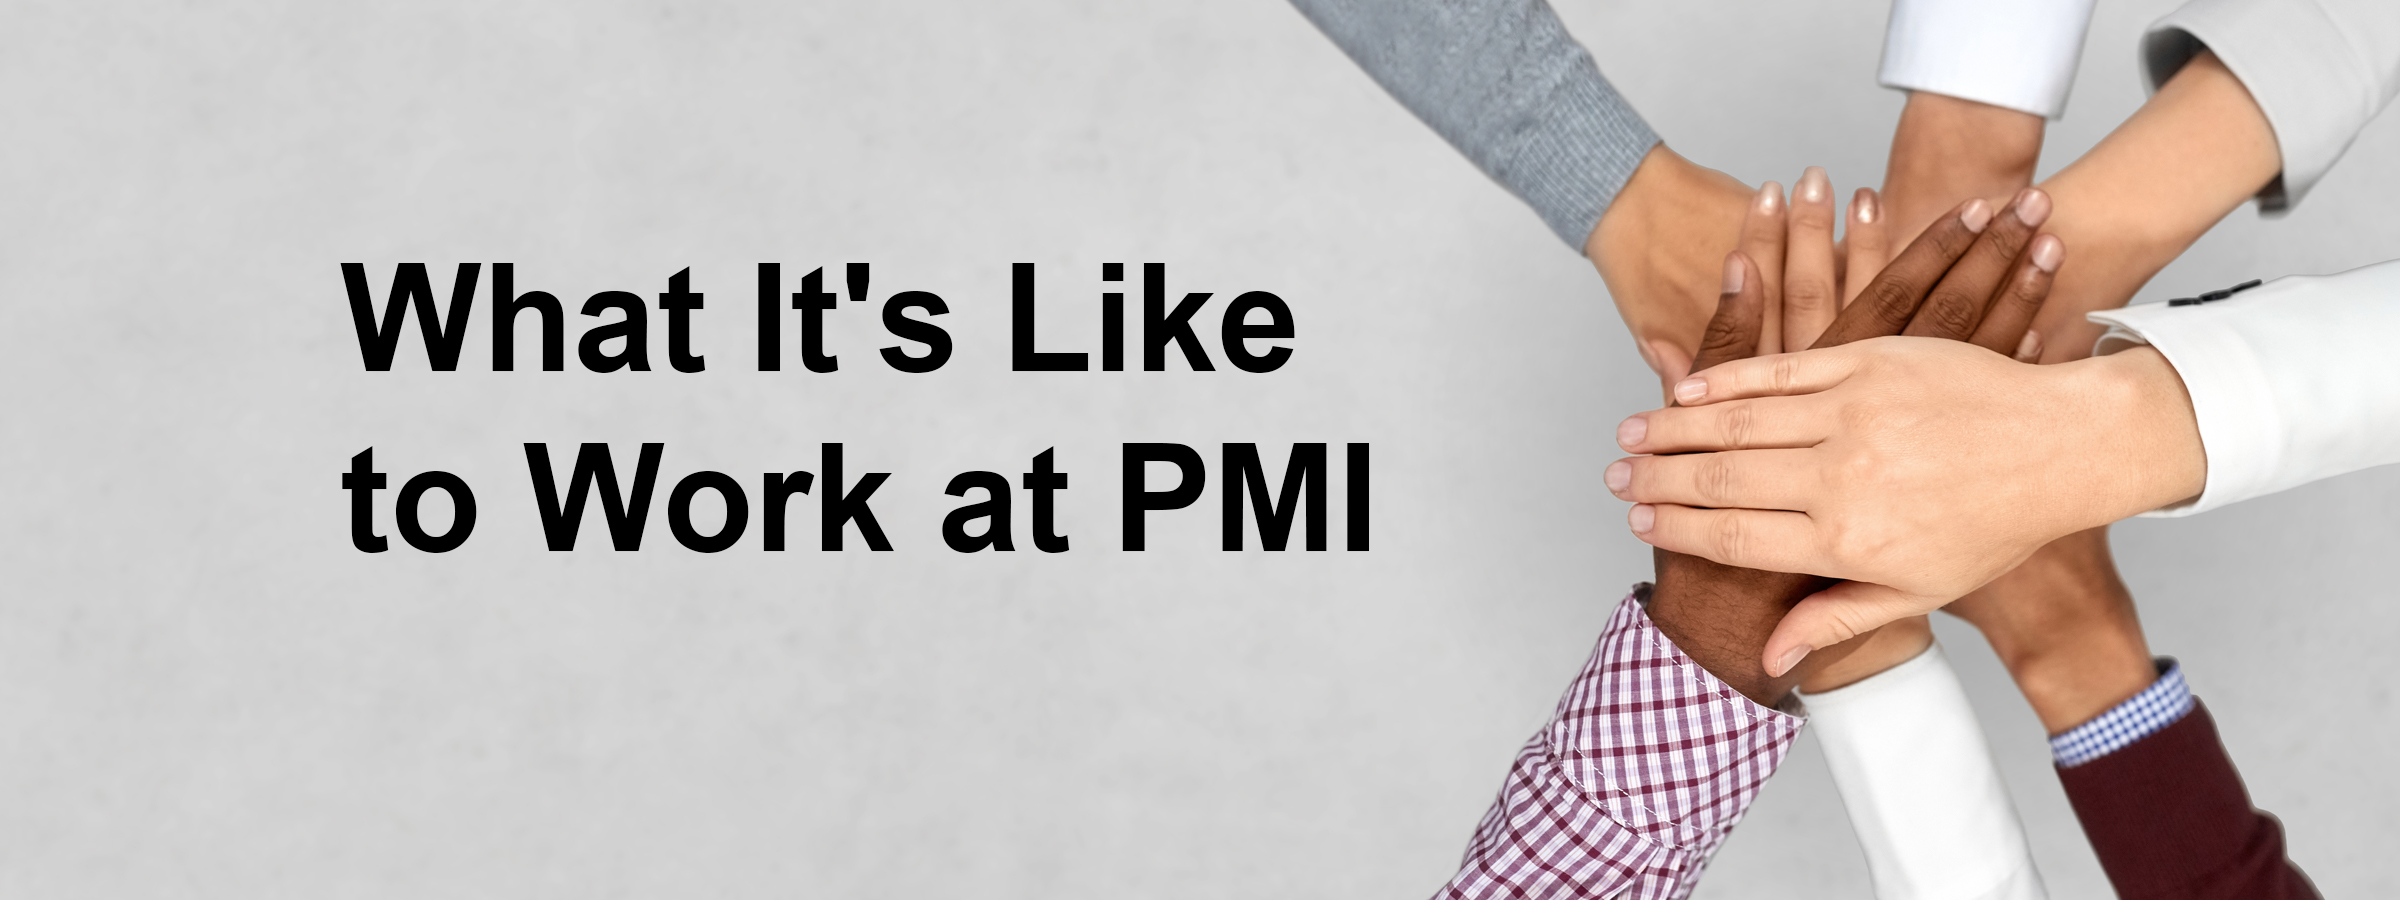 What It's Like to Work at PMI Property Management Inc